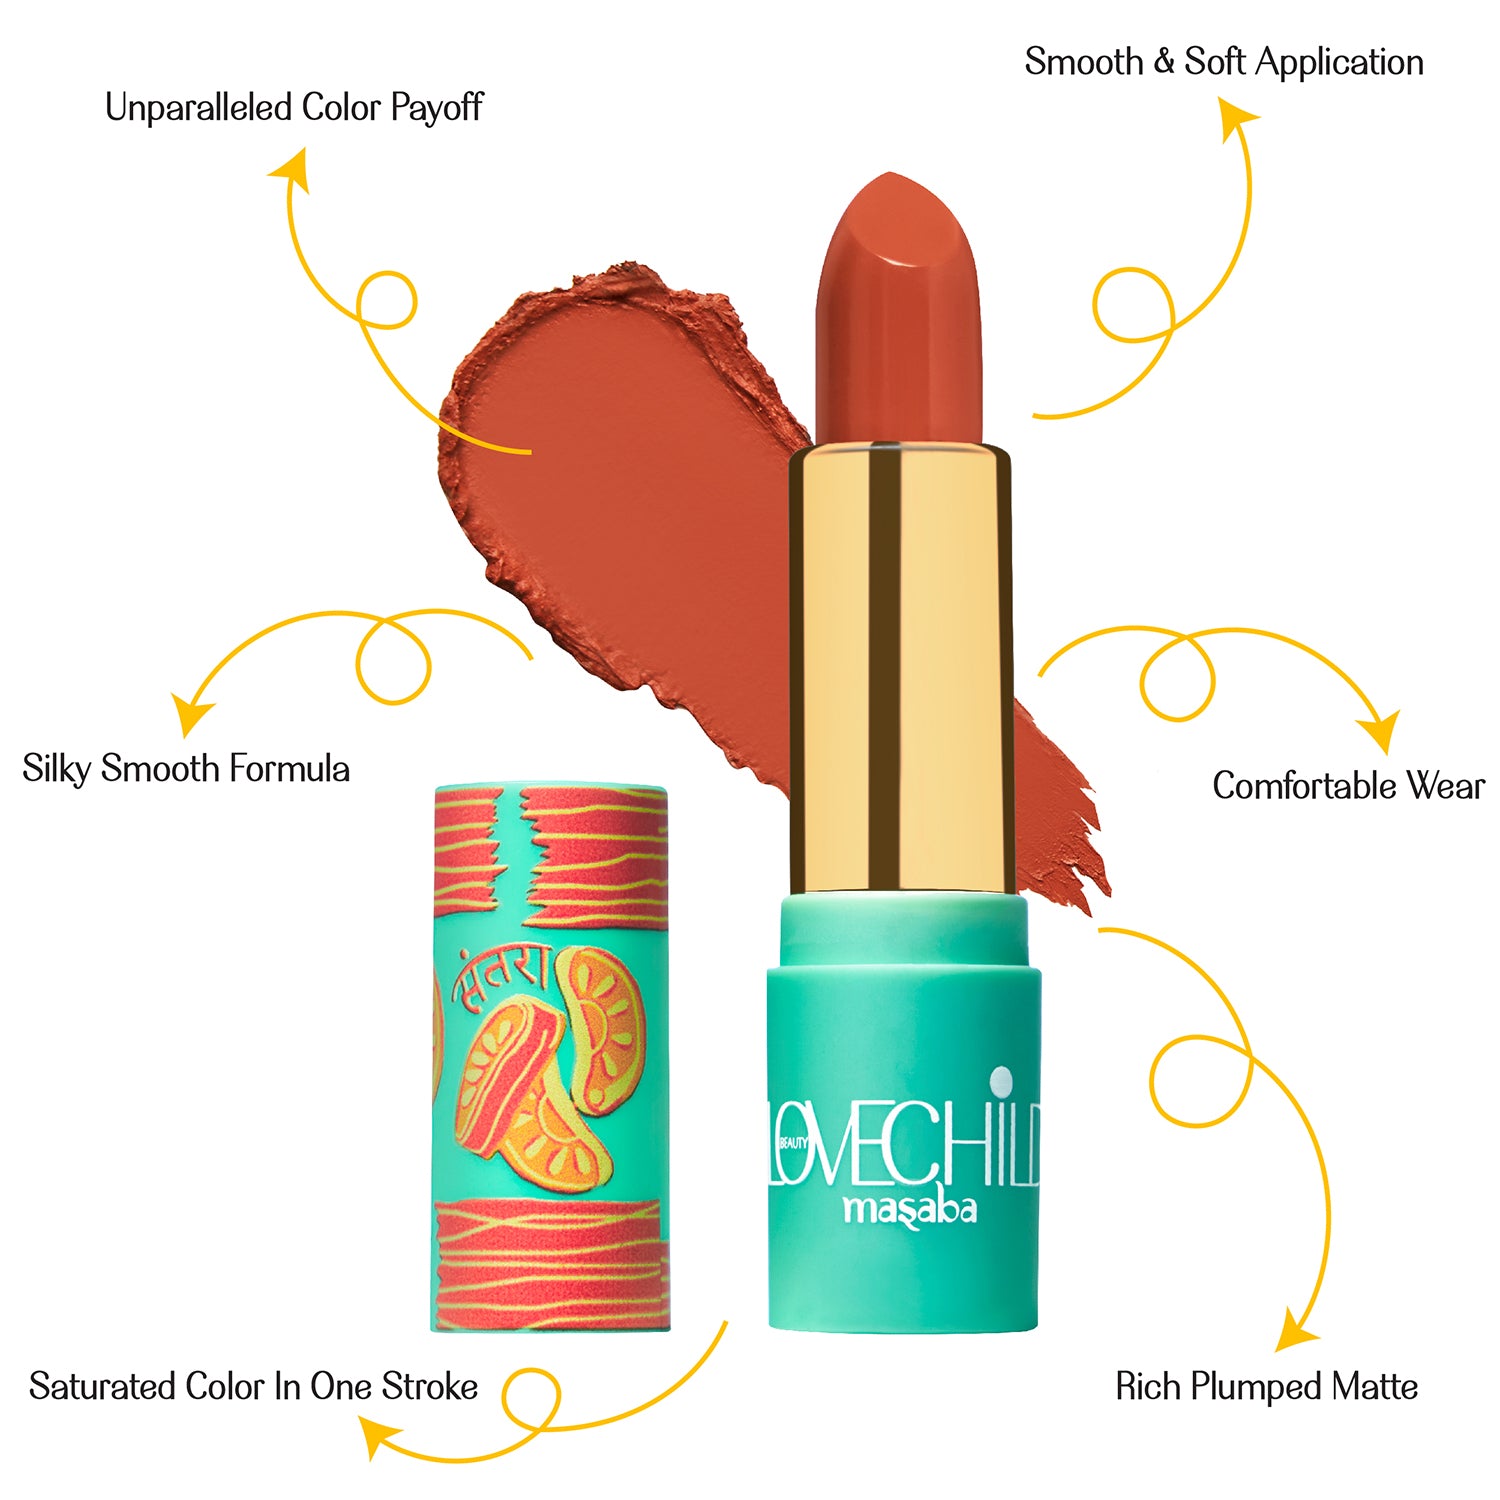 LoveChild Masaba - For the Kid in You! - 09 Sour-casm - Luxe Matte Lipstick